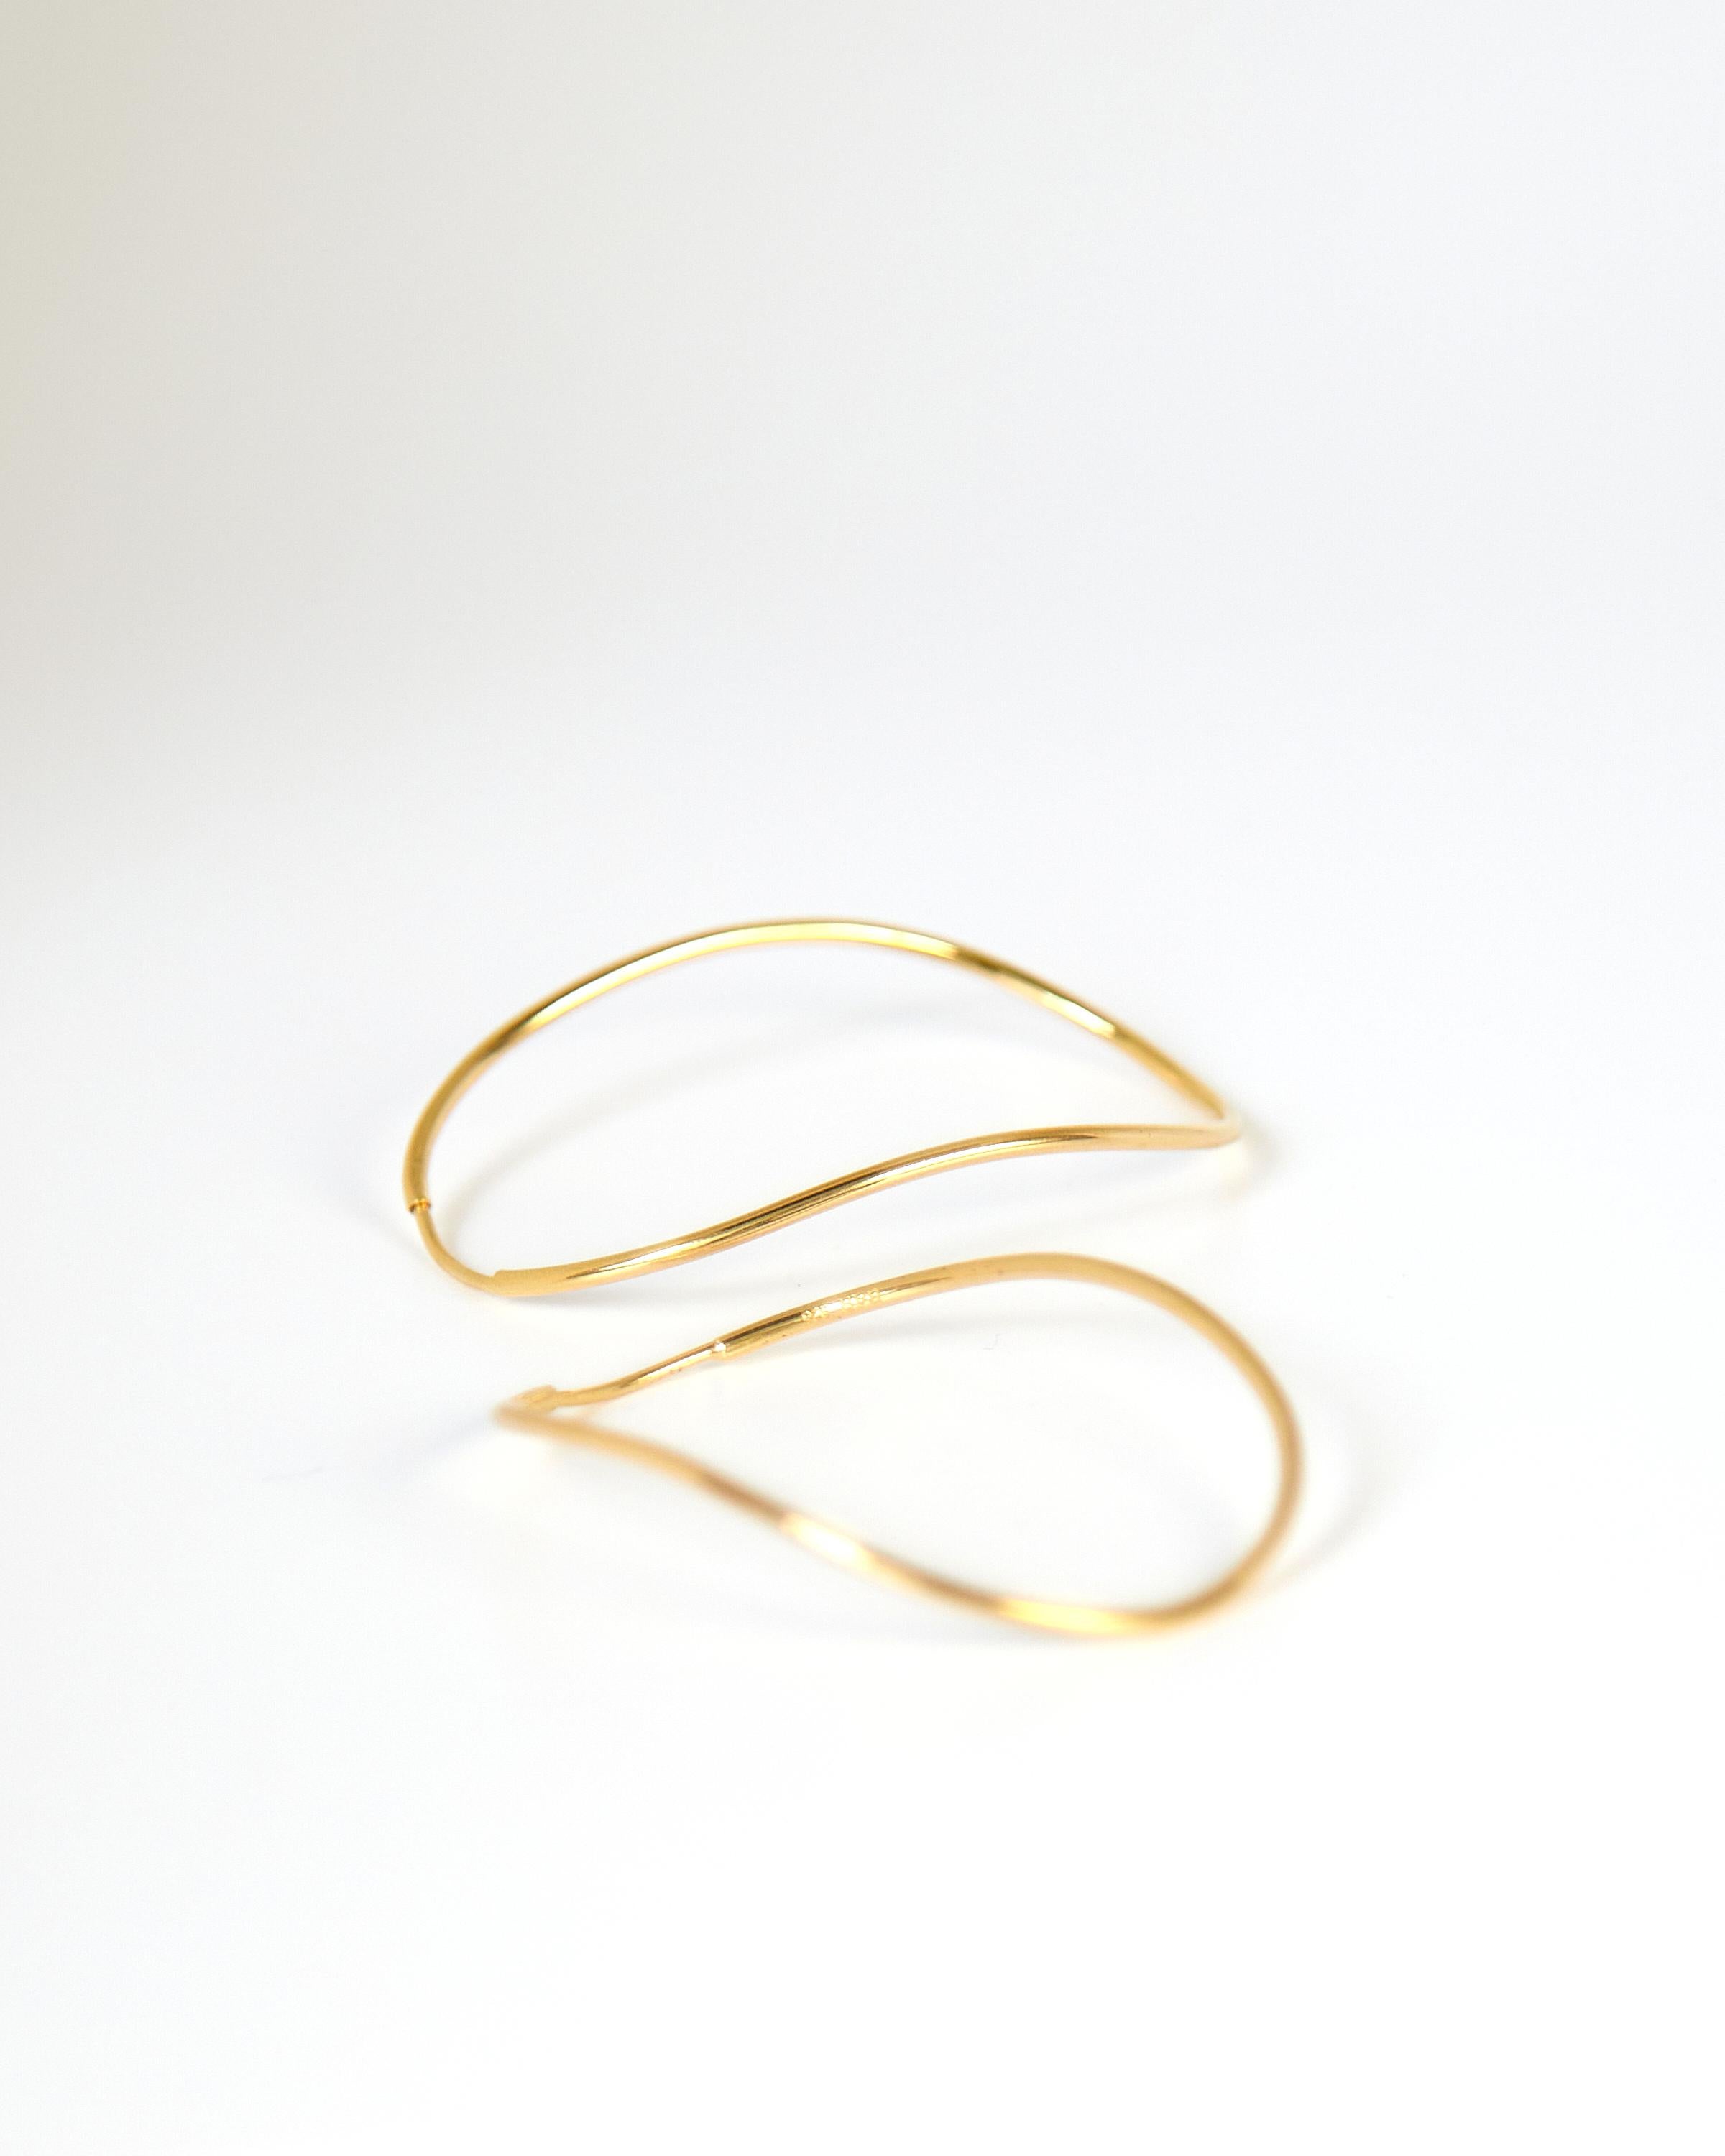 Modernist Curve Hoop Earrings, 18 Carat Gold Plated Recycled Silver  In New Condition For Sale In London, GB